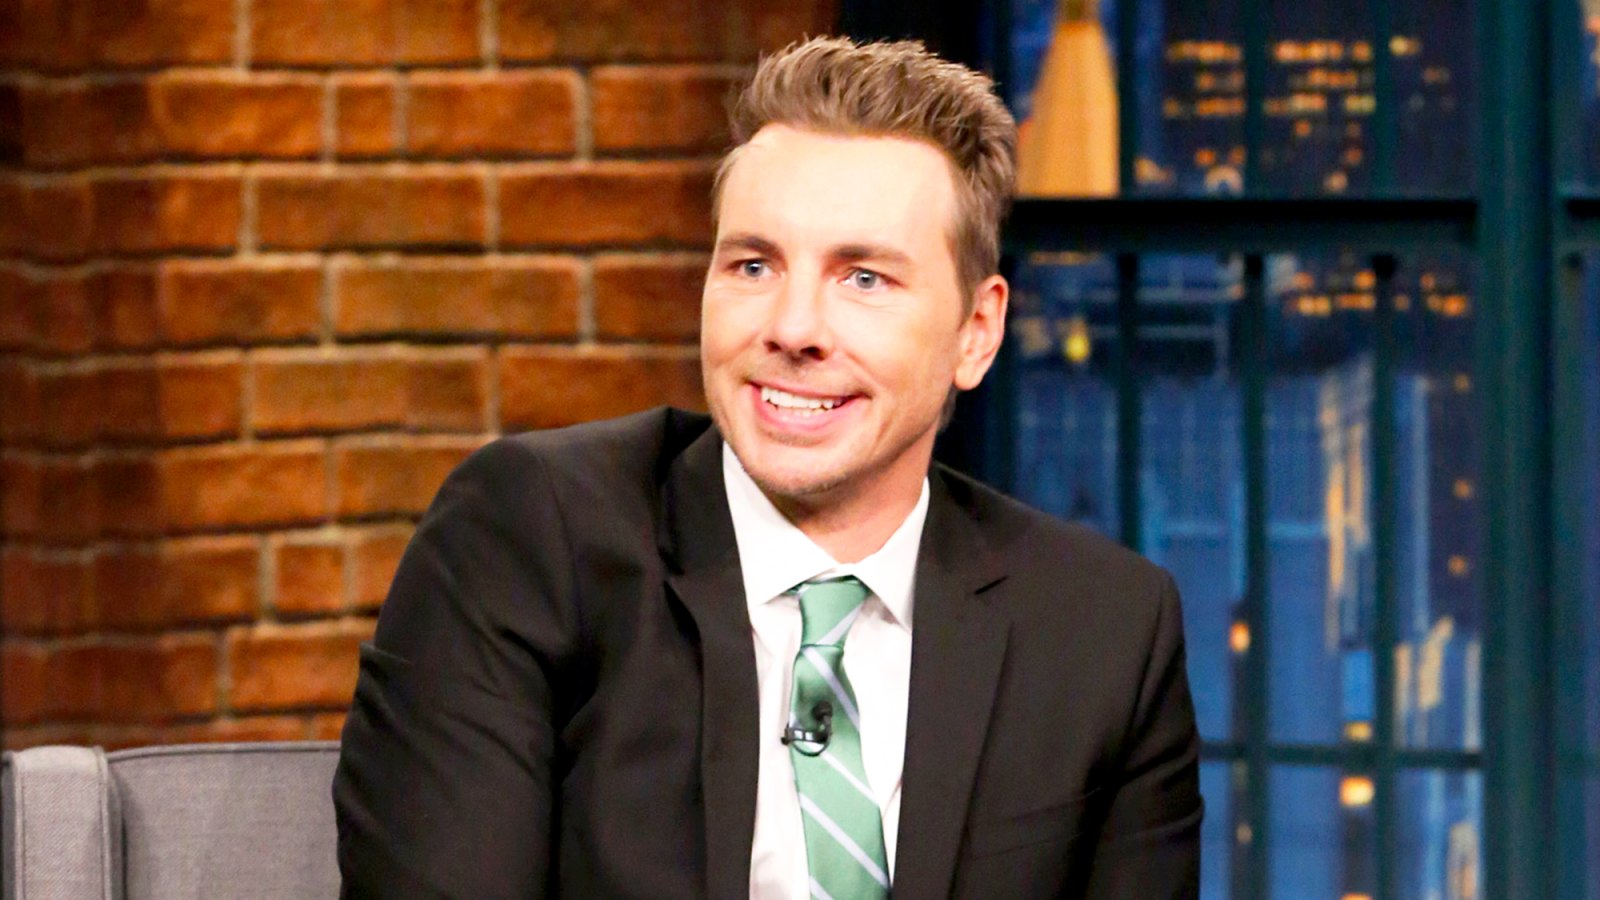 Dax Shepherd during ‘Late Night with Seth Meyers‘